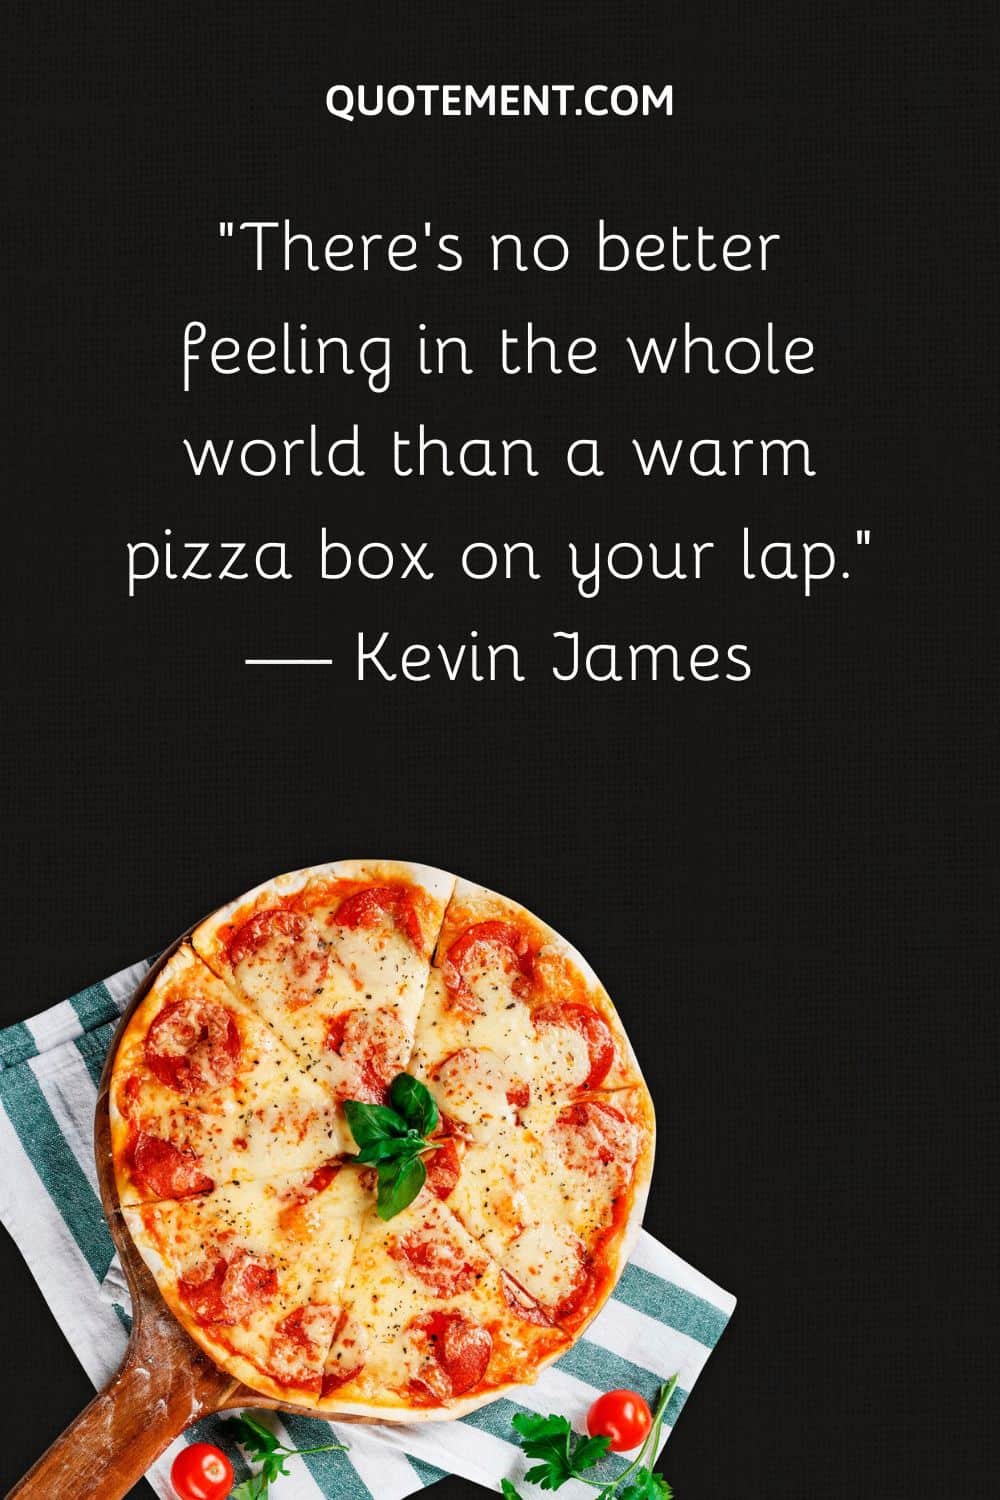 There’s no better feeling in the whole world than a warm pizza